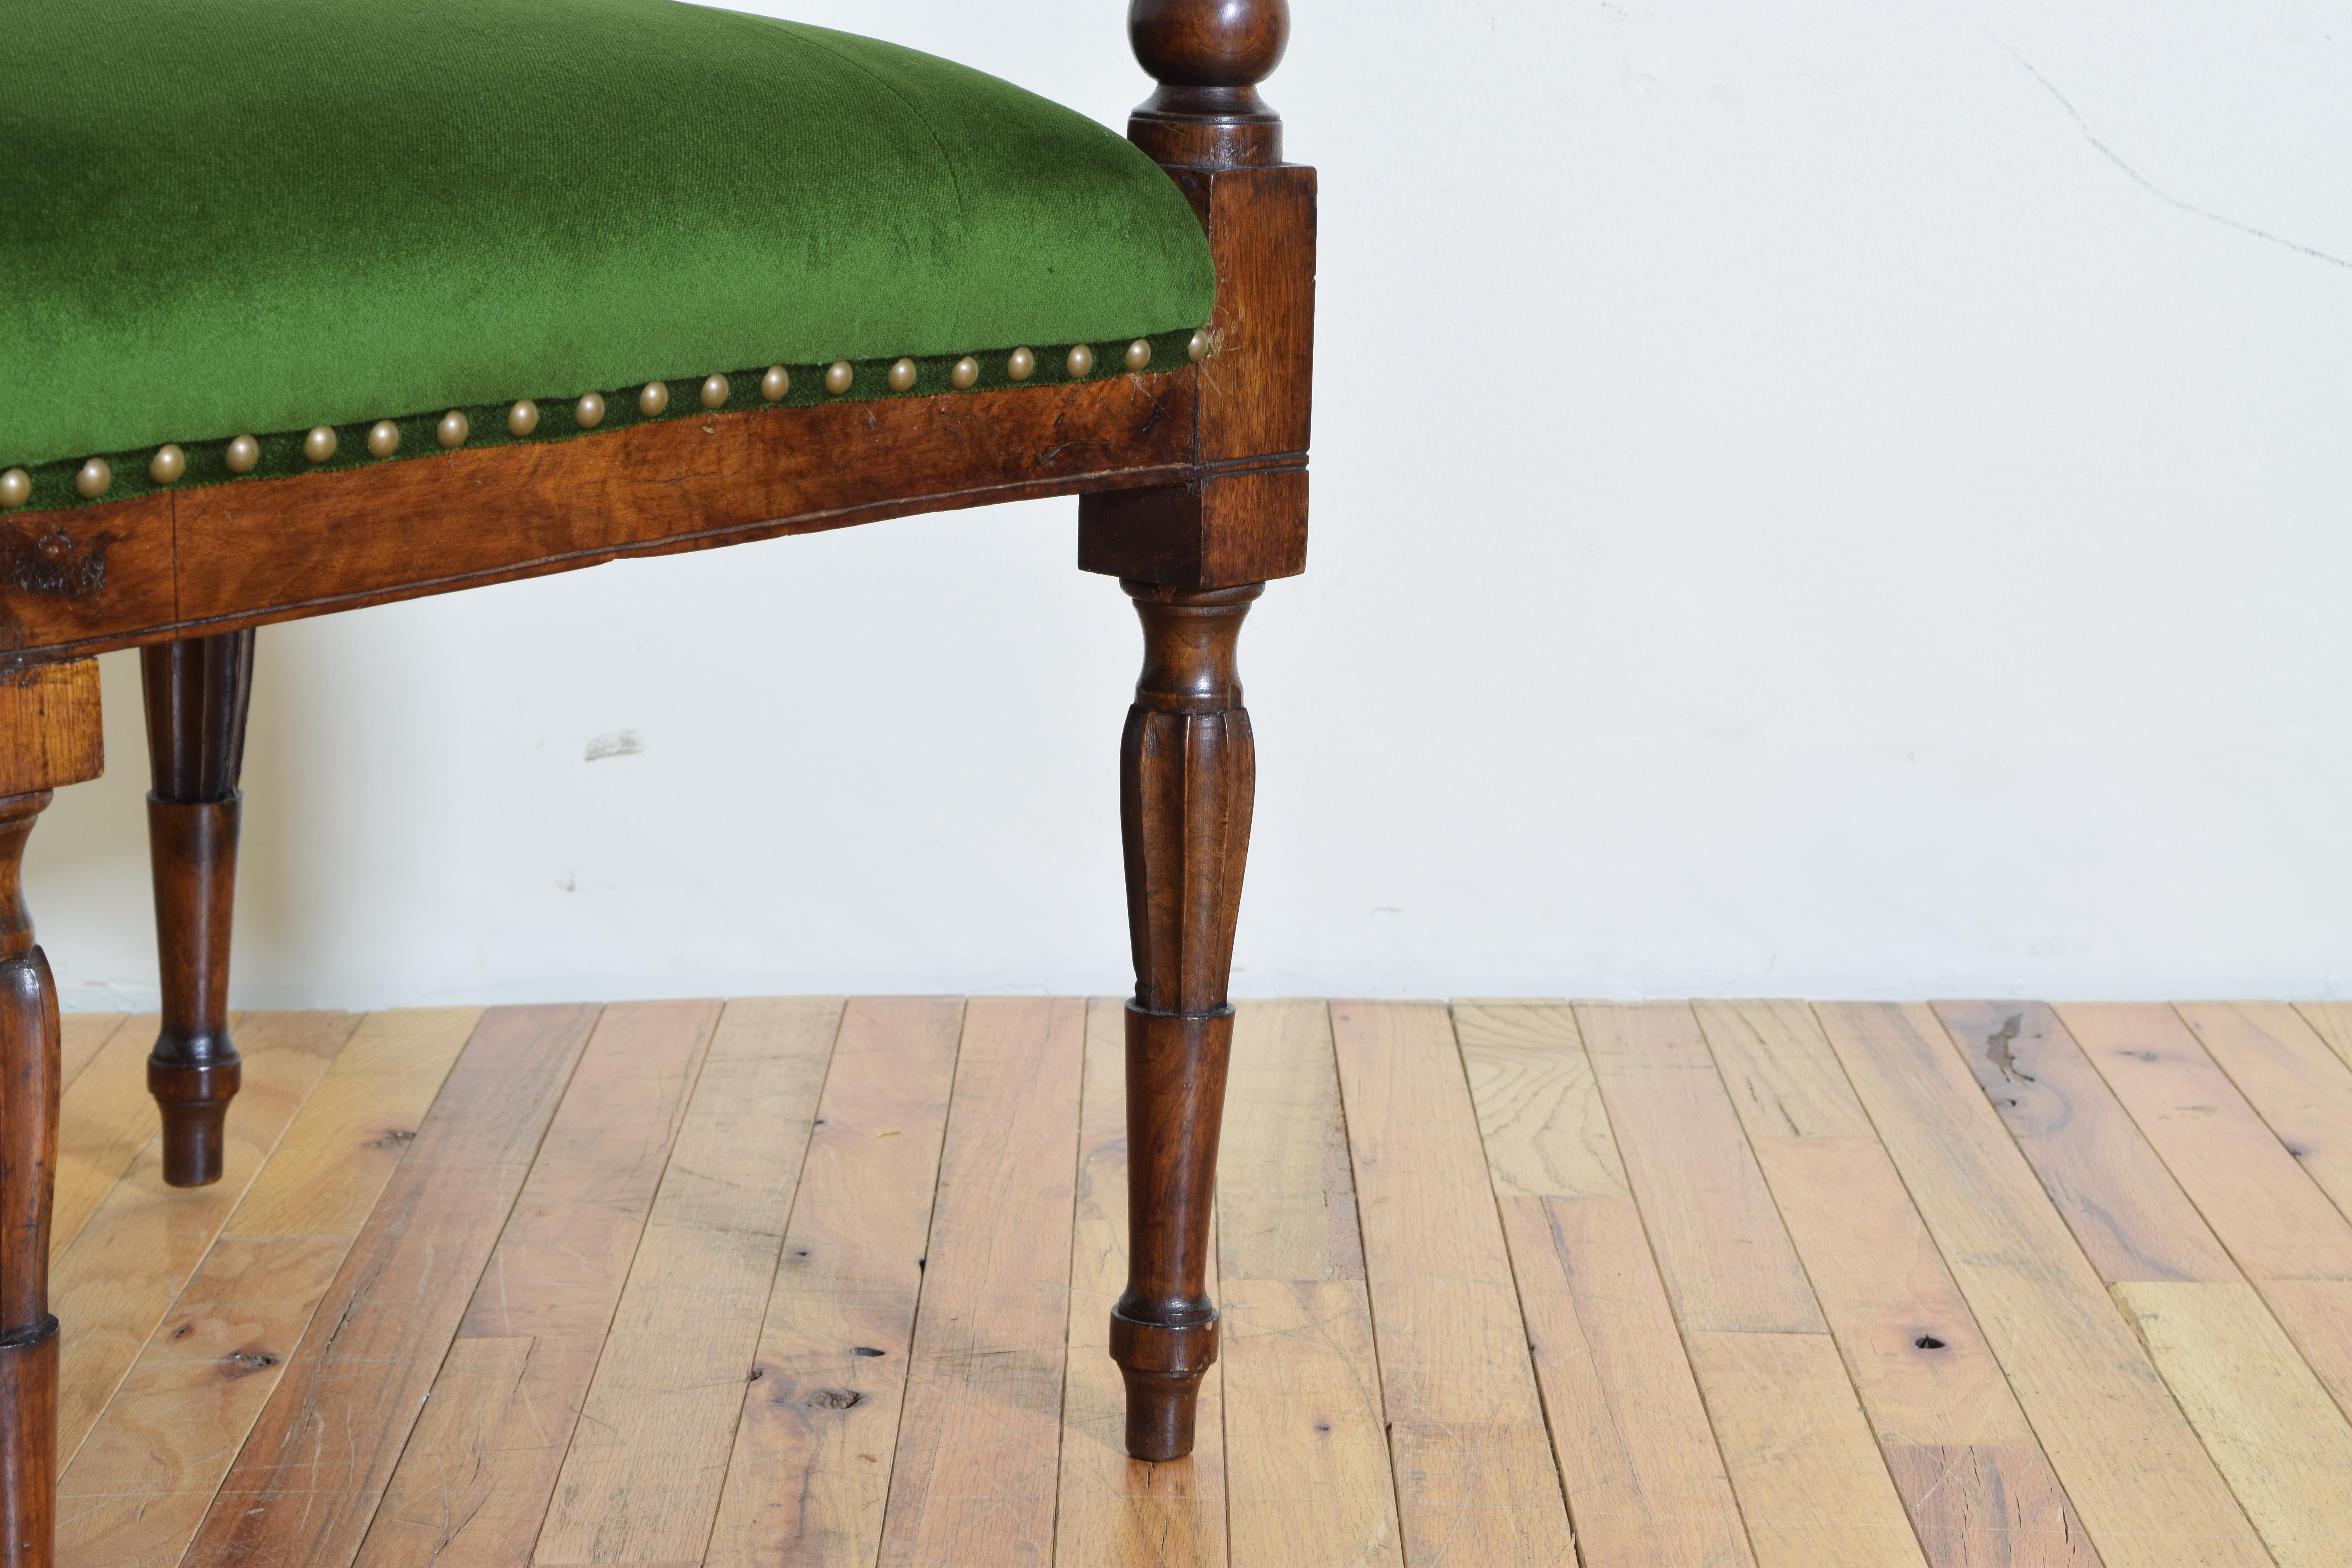 Nothern Italian Carved Walnut and Upholstered Bench Late 18th-Early 19th Century (Spätes 18. Jahrhundert)